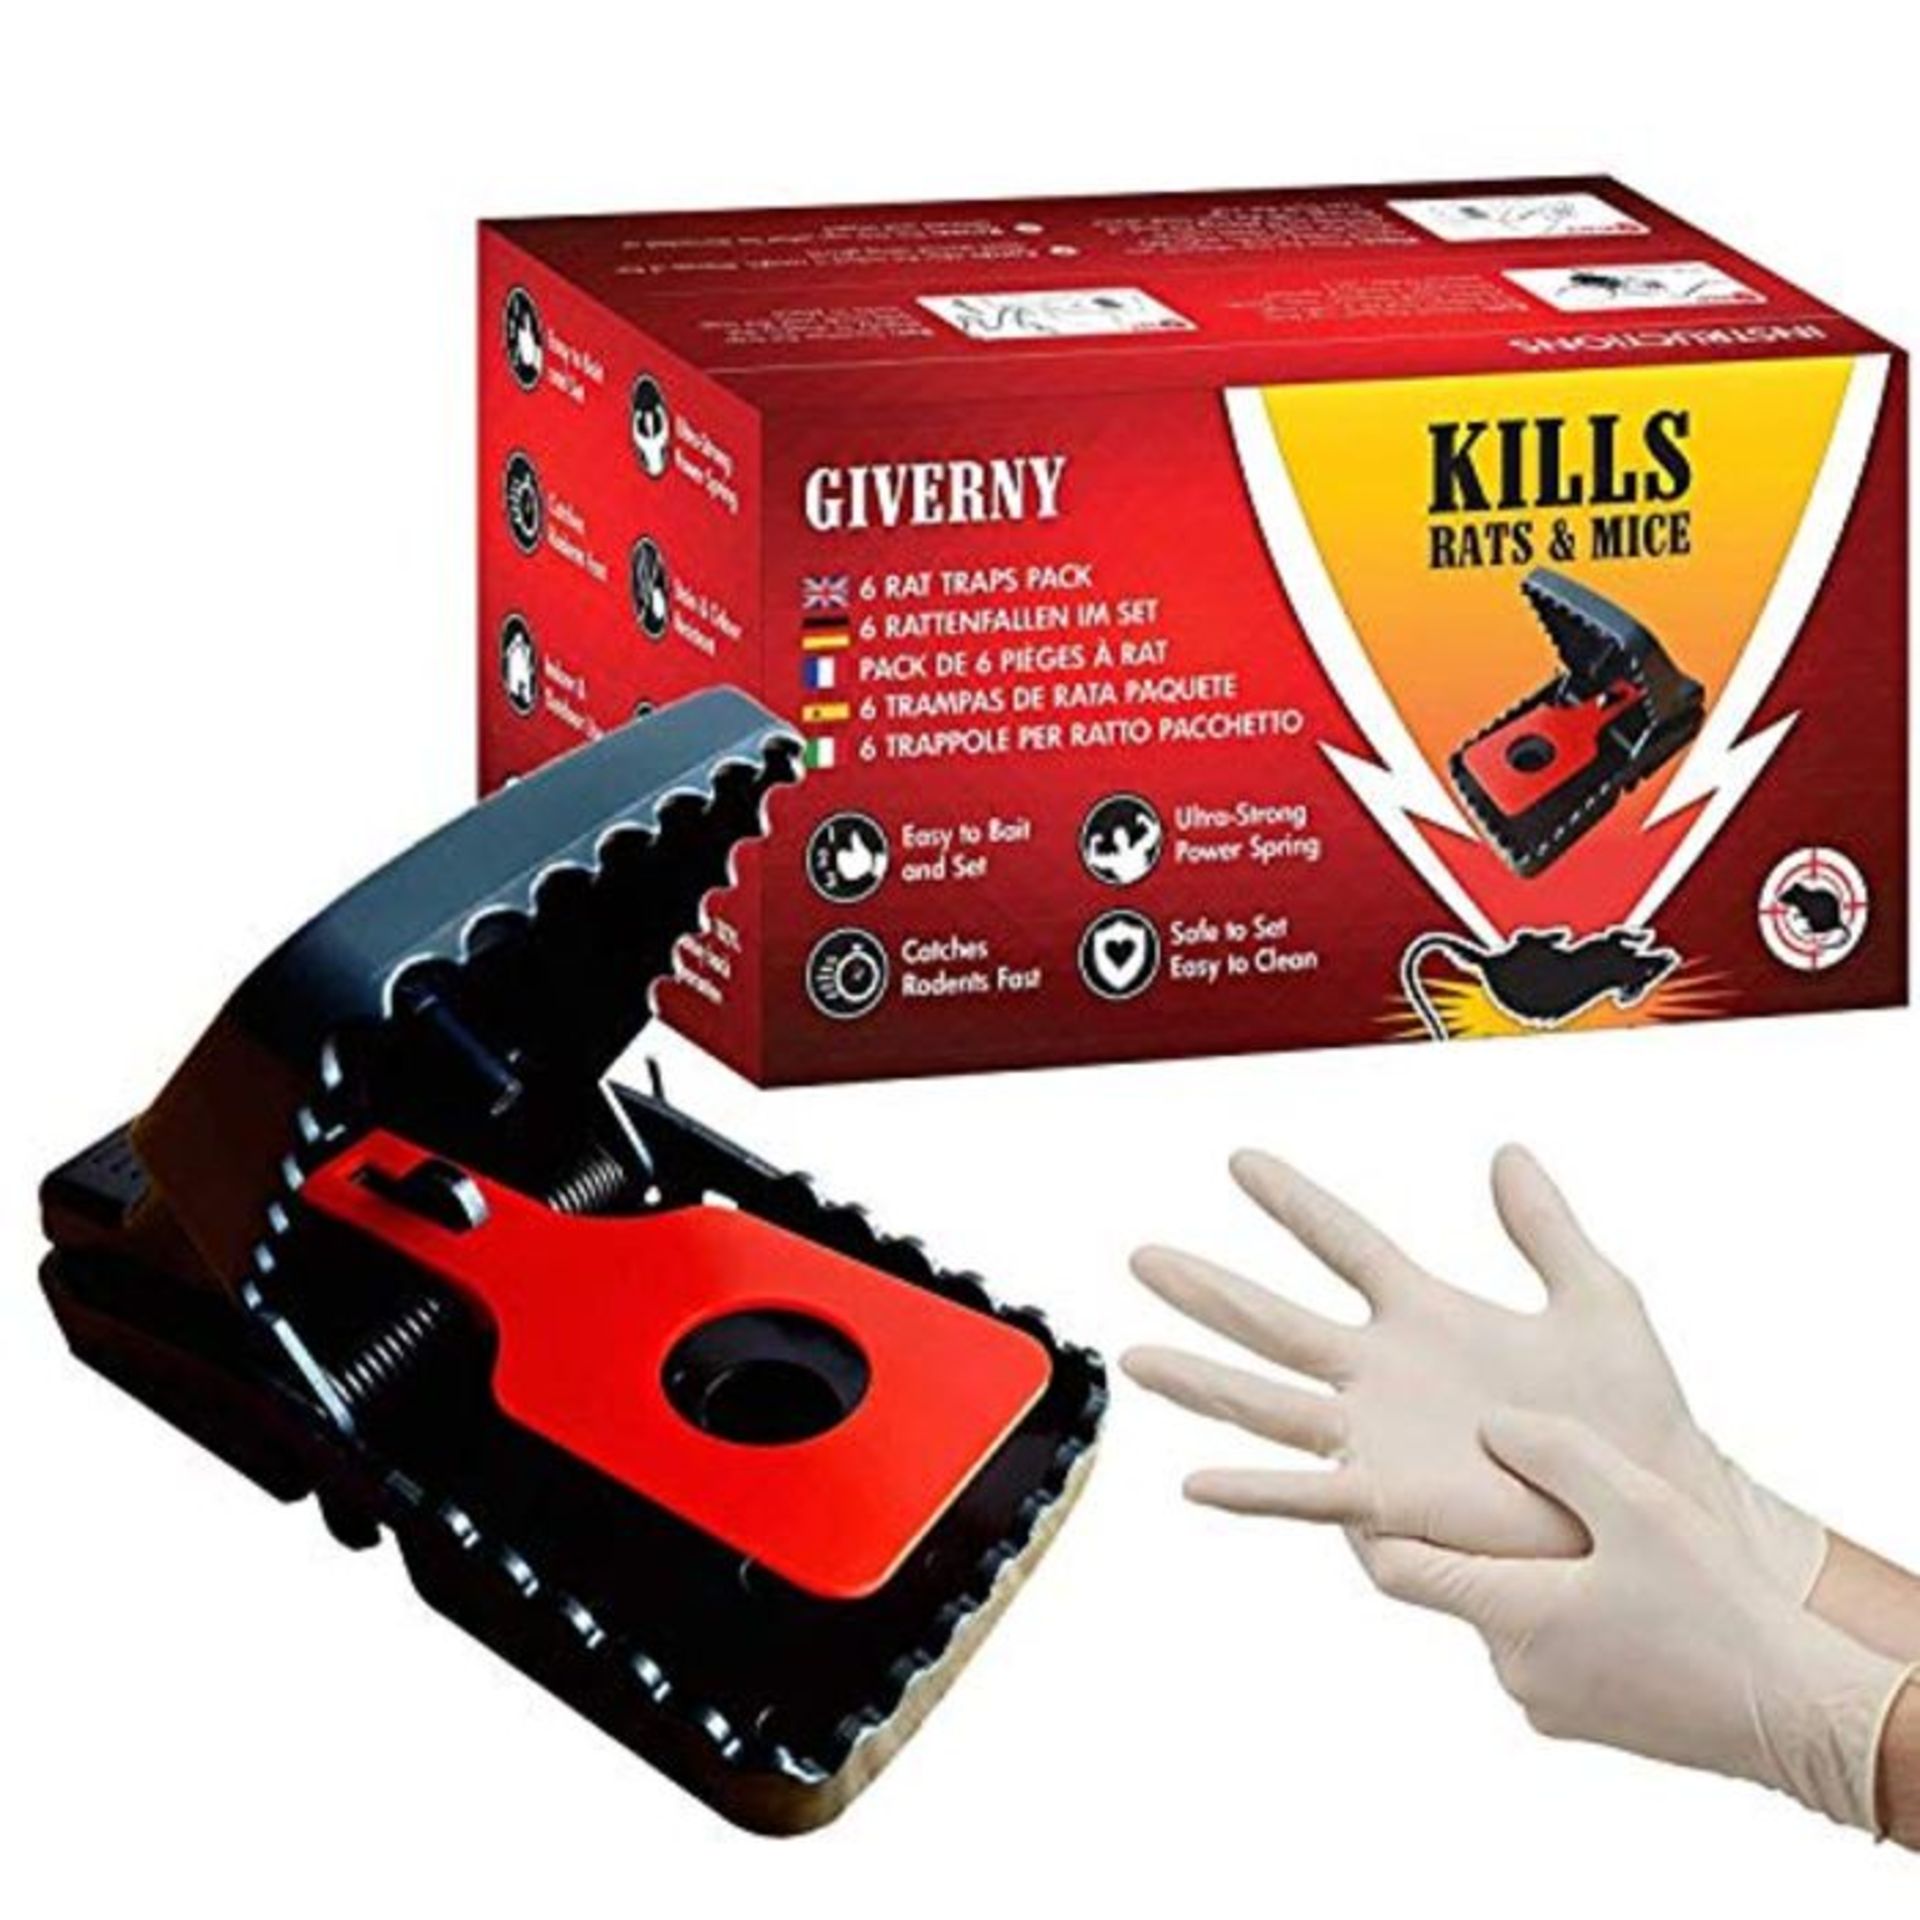 GIVERNY Trap Capture, Safe use, Fast and Effective Killer, Kill Immediately, Humane De